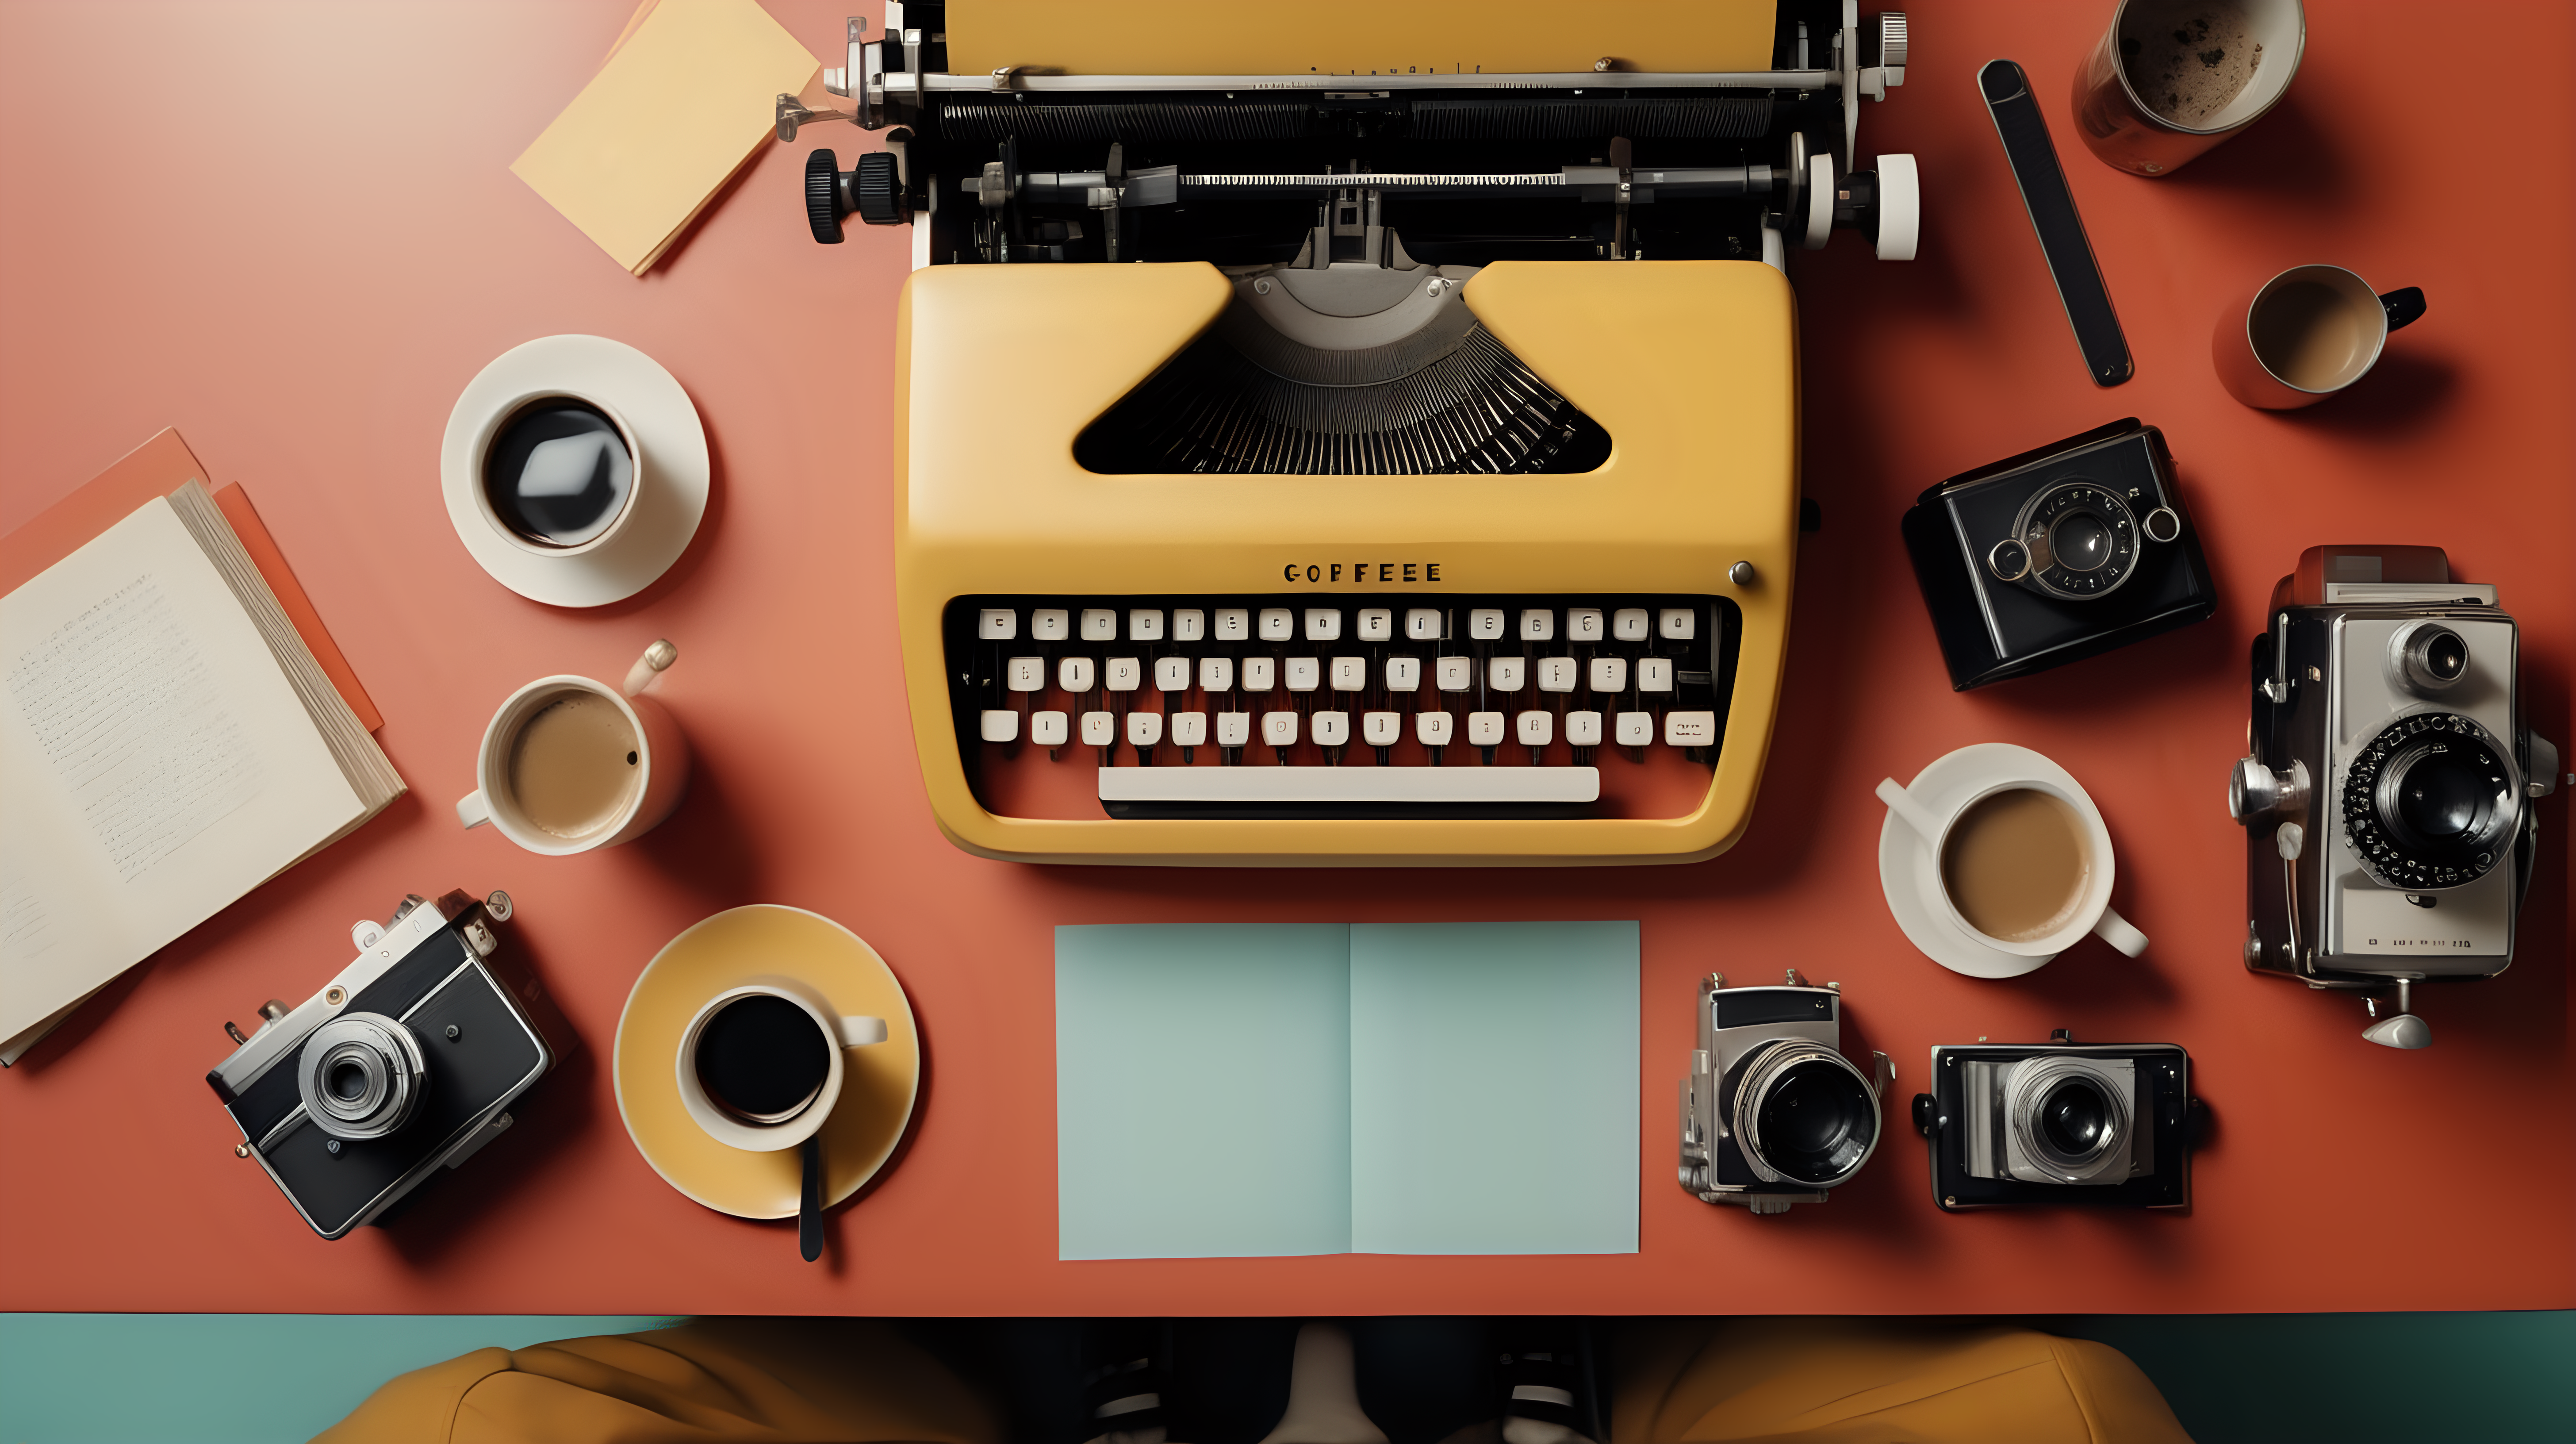 Wide shot of desktop with coffee cup, typewriter, film camera  in the style of a wes anderson film. Camera looking down on desktop from above.